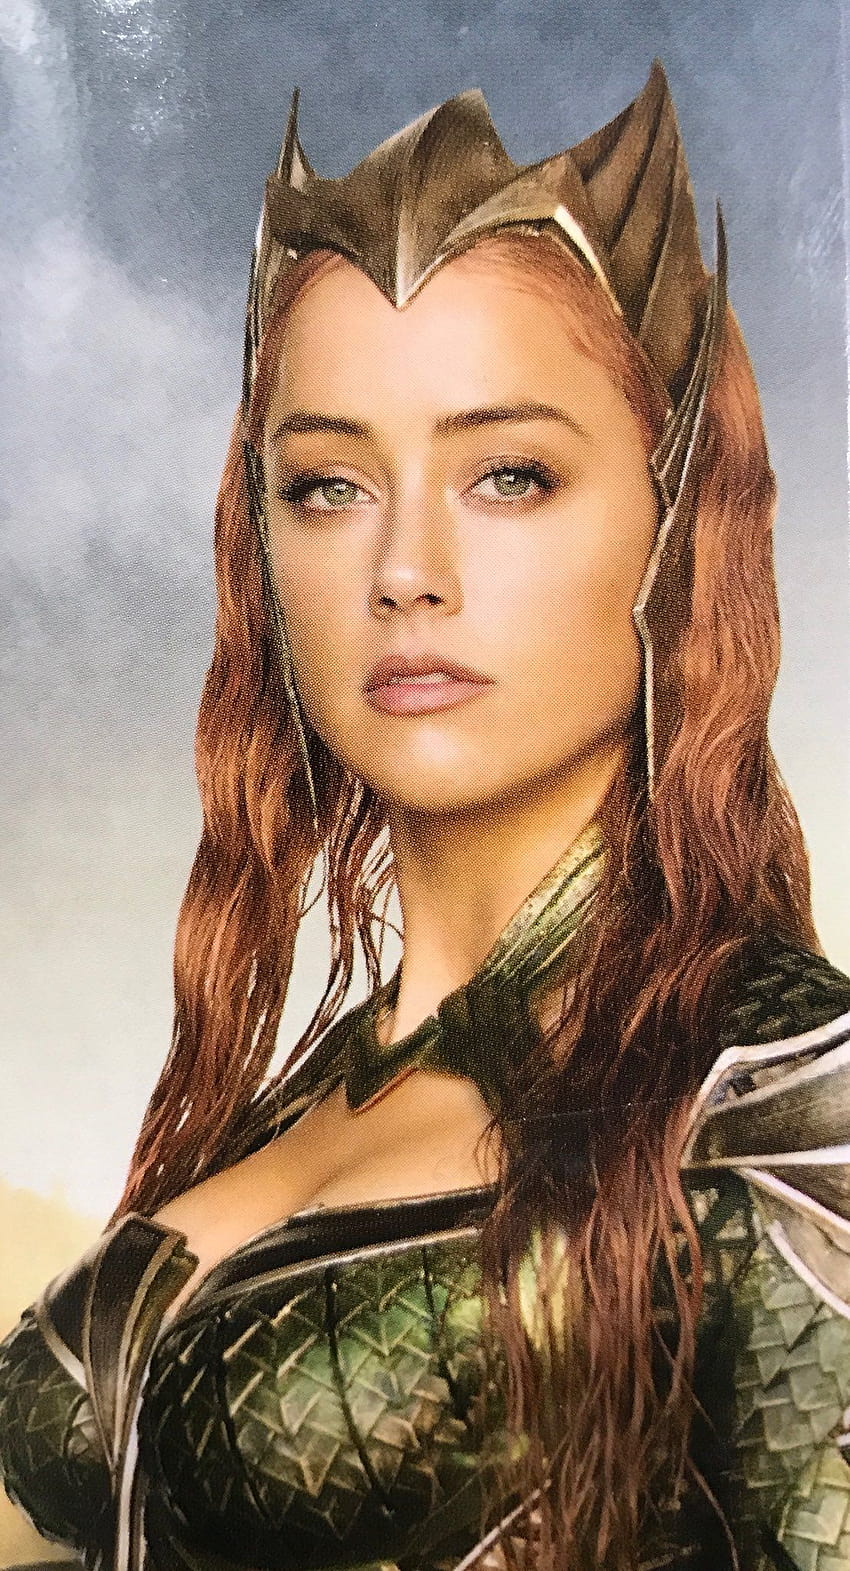 JUSTICE LEAGUE Promotional Provides A Stunning New Look At Amber Heard As Mera, dc extended universe mera HD phone wallpaper